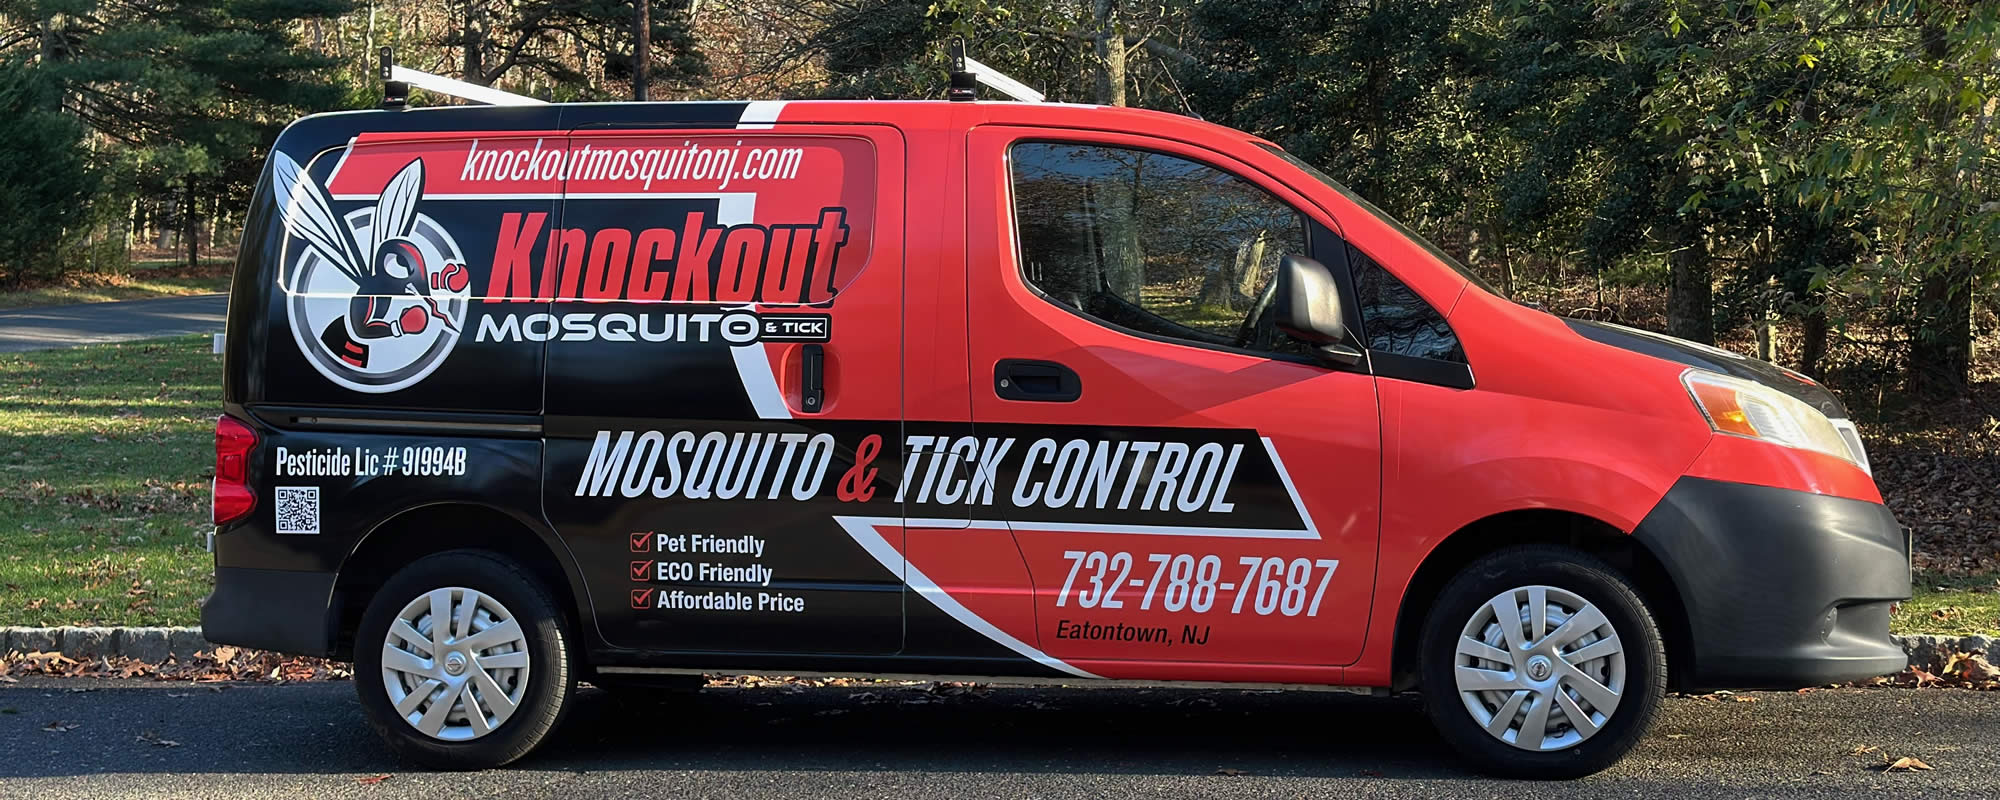 Middletown Township Mosquito Control Services